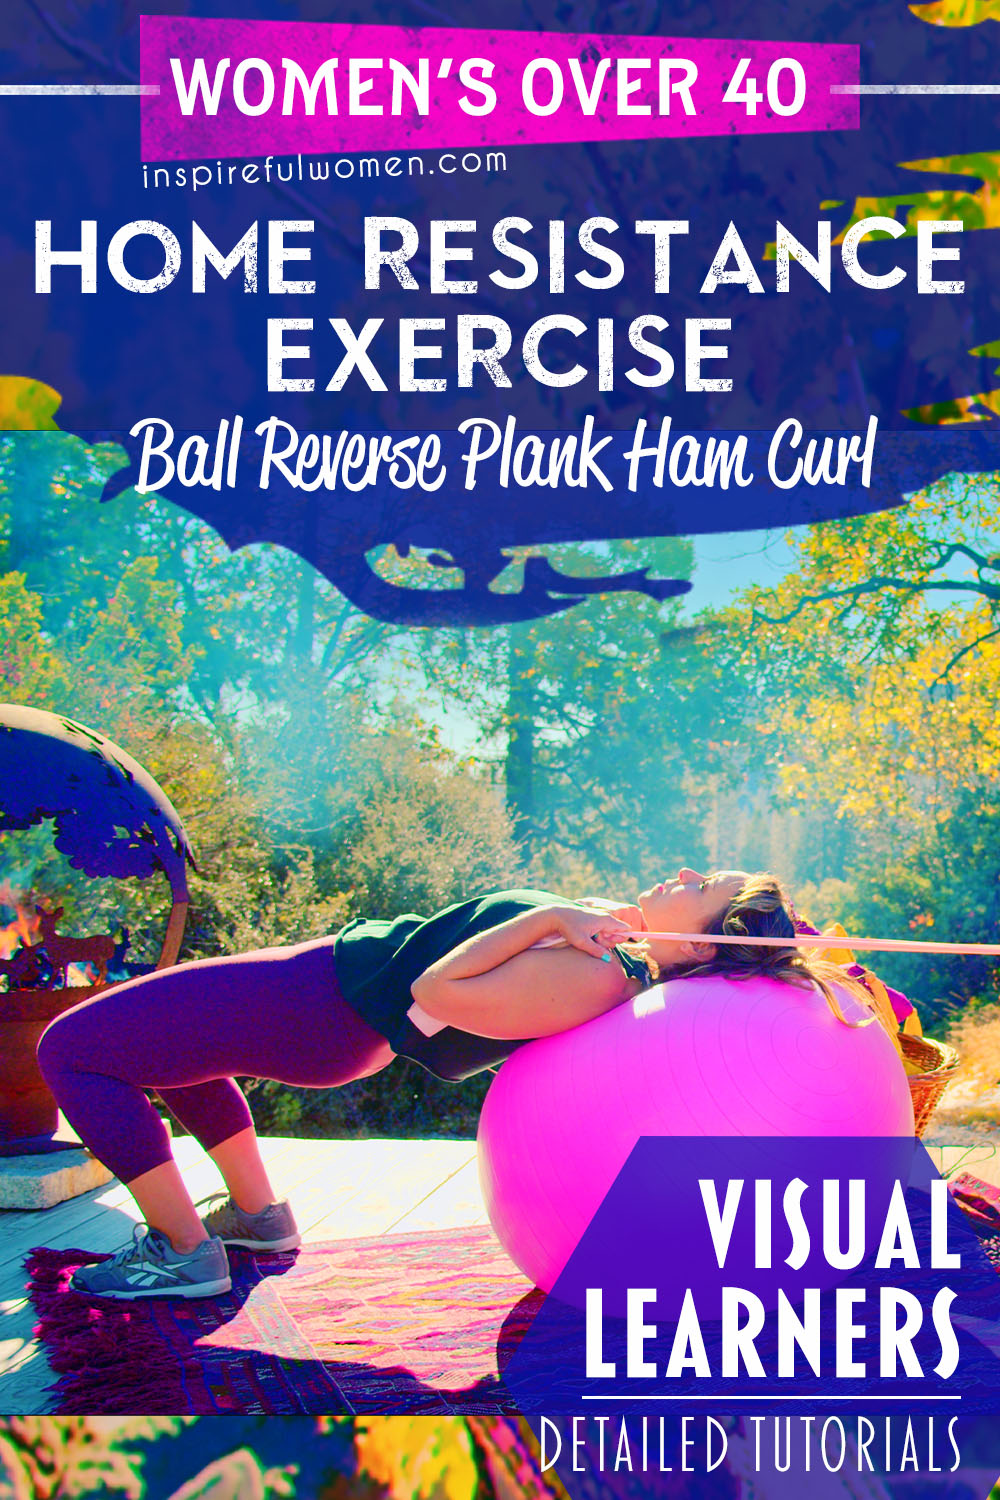 yoga-ball-reverse-plank-band-hamstring-curl-one-leg-hamstring-exercise-at-home-women-over-40